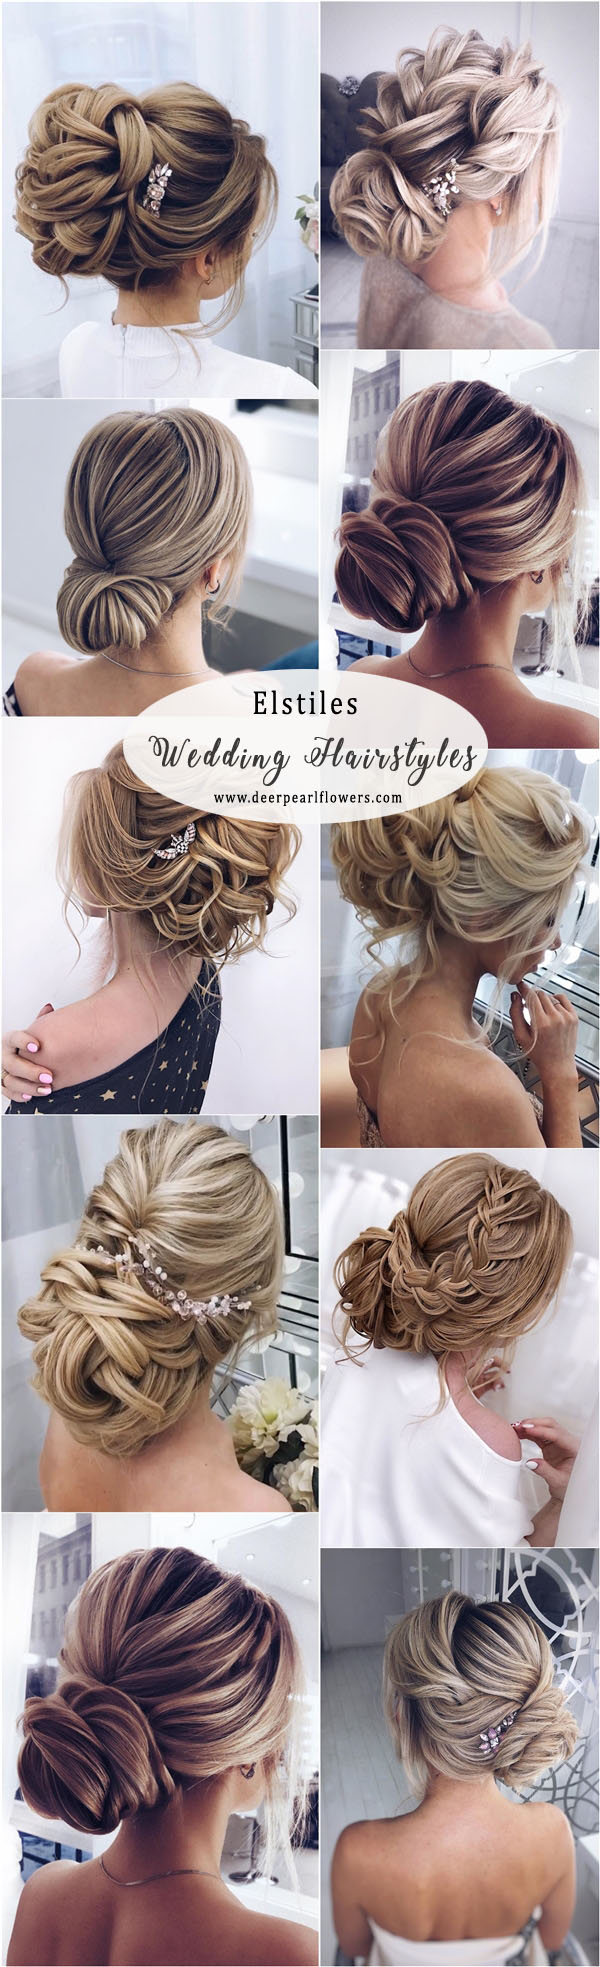 Elstiles long wedding updo hairstyles for brides